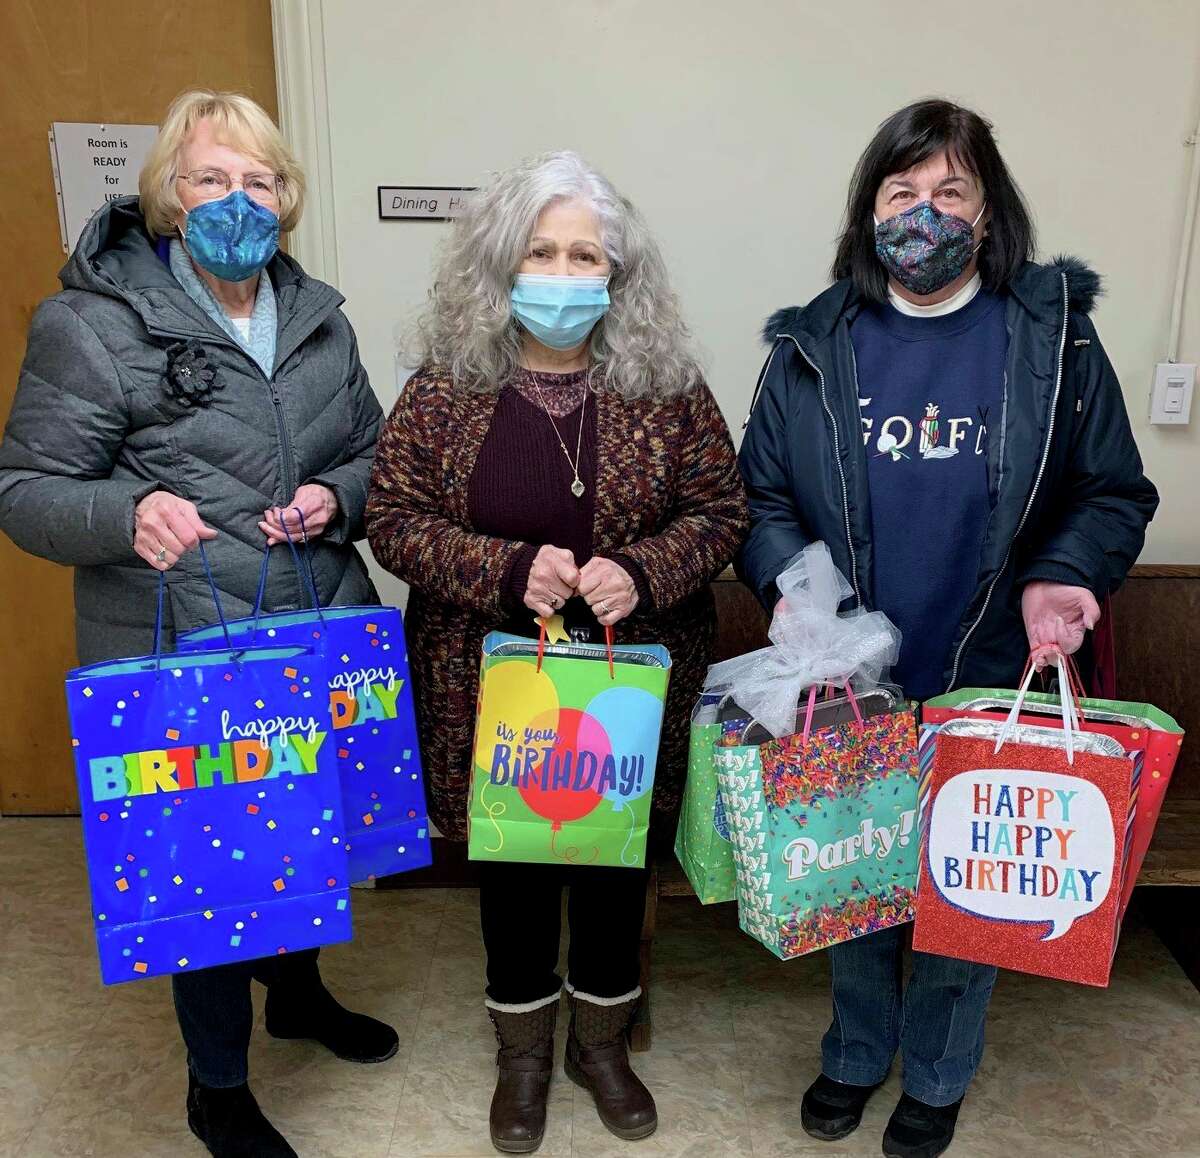 Spreading birthday cheer with bags full of goodies includes, from left, GFWC Member Melanie Henry, Diane Long, Project Starburst Executive Director and GFWC Member Pat Rossi. (Courtesy photo)